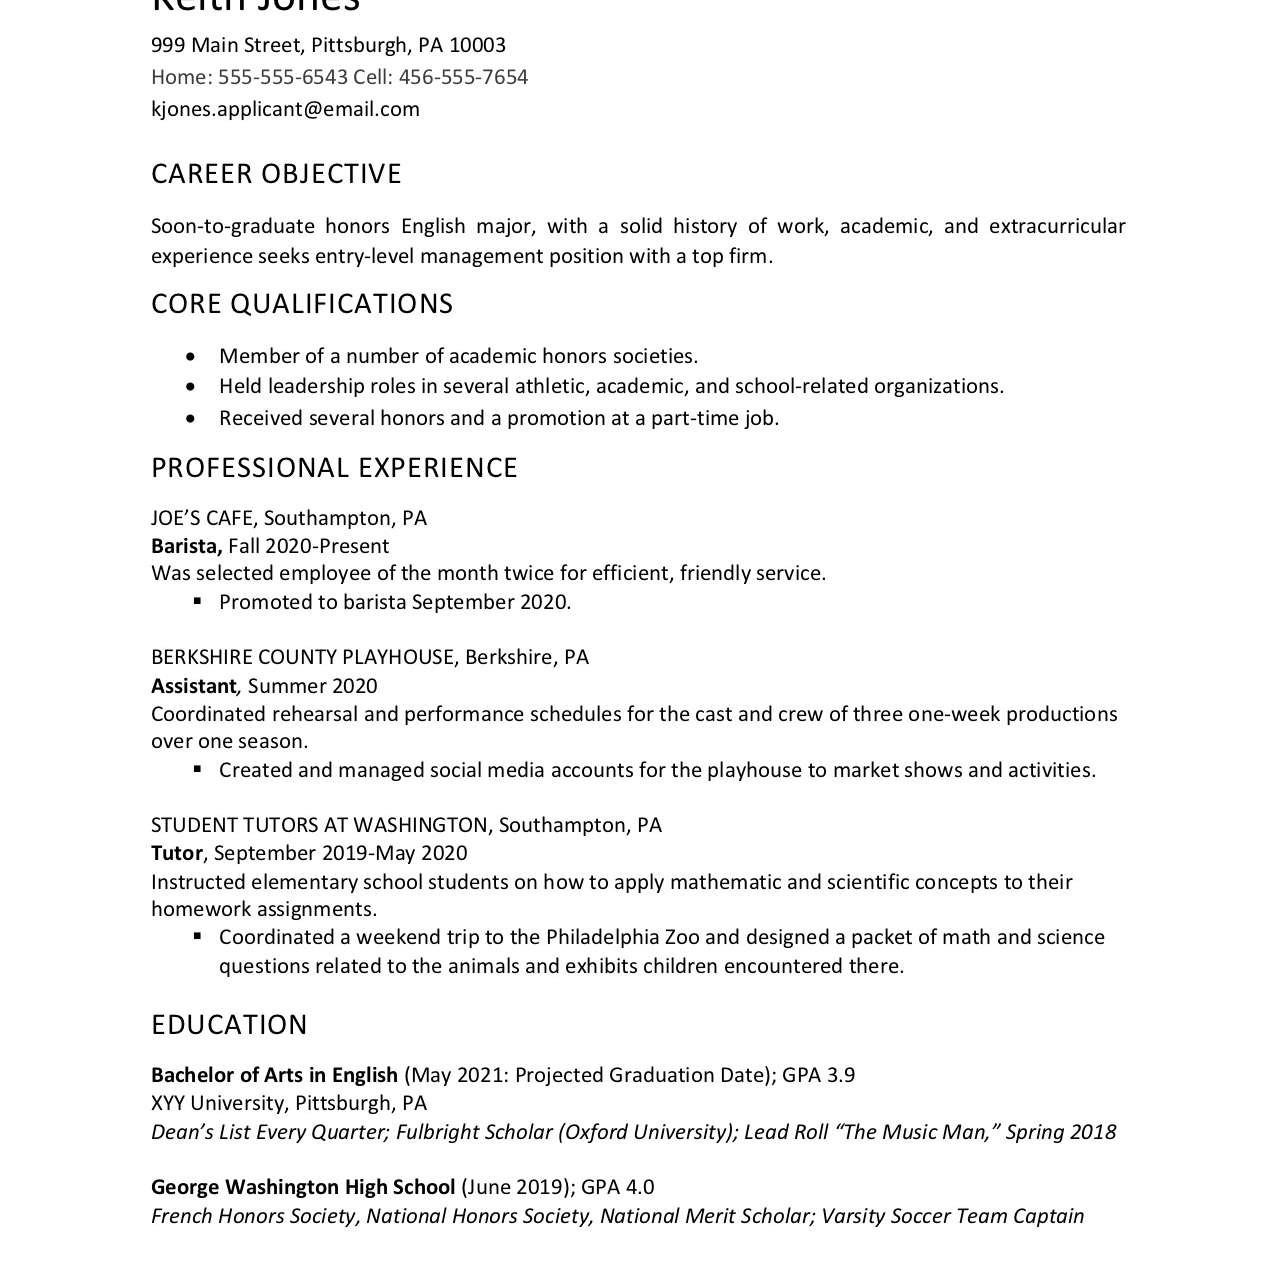 Sample Resume for High School Graduate with Little Experience High School Graduate Resume Example and Writing Tips